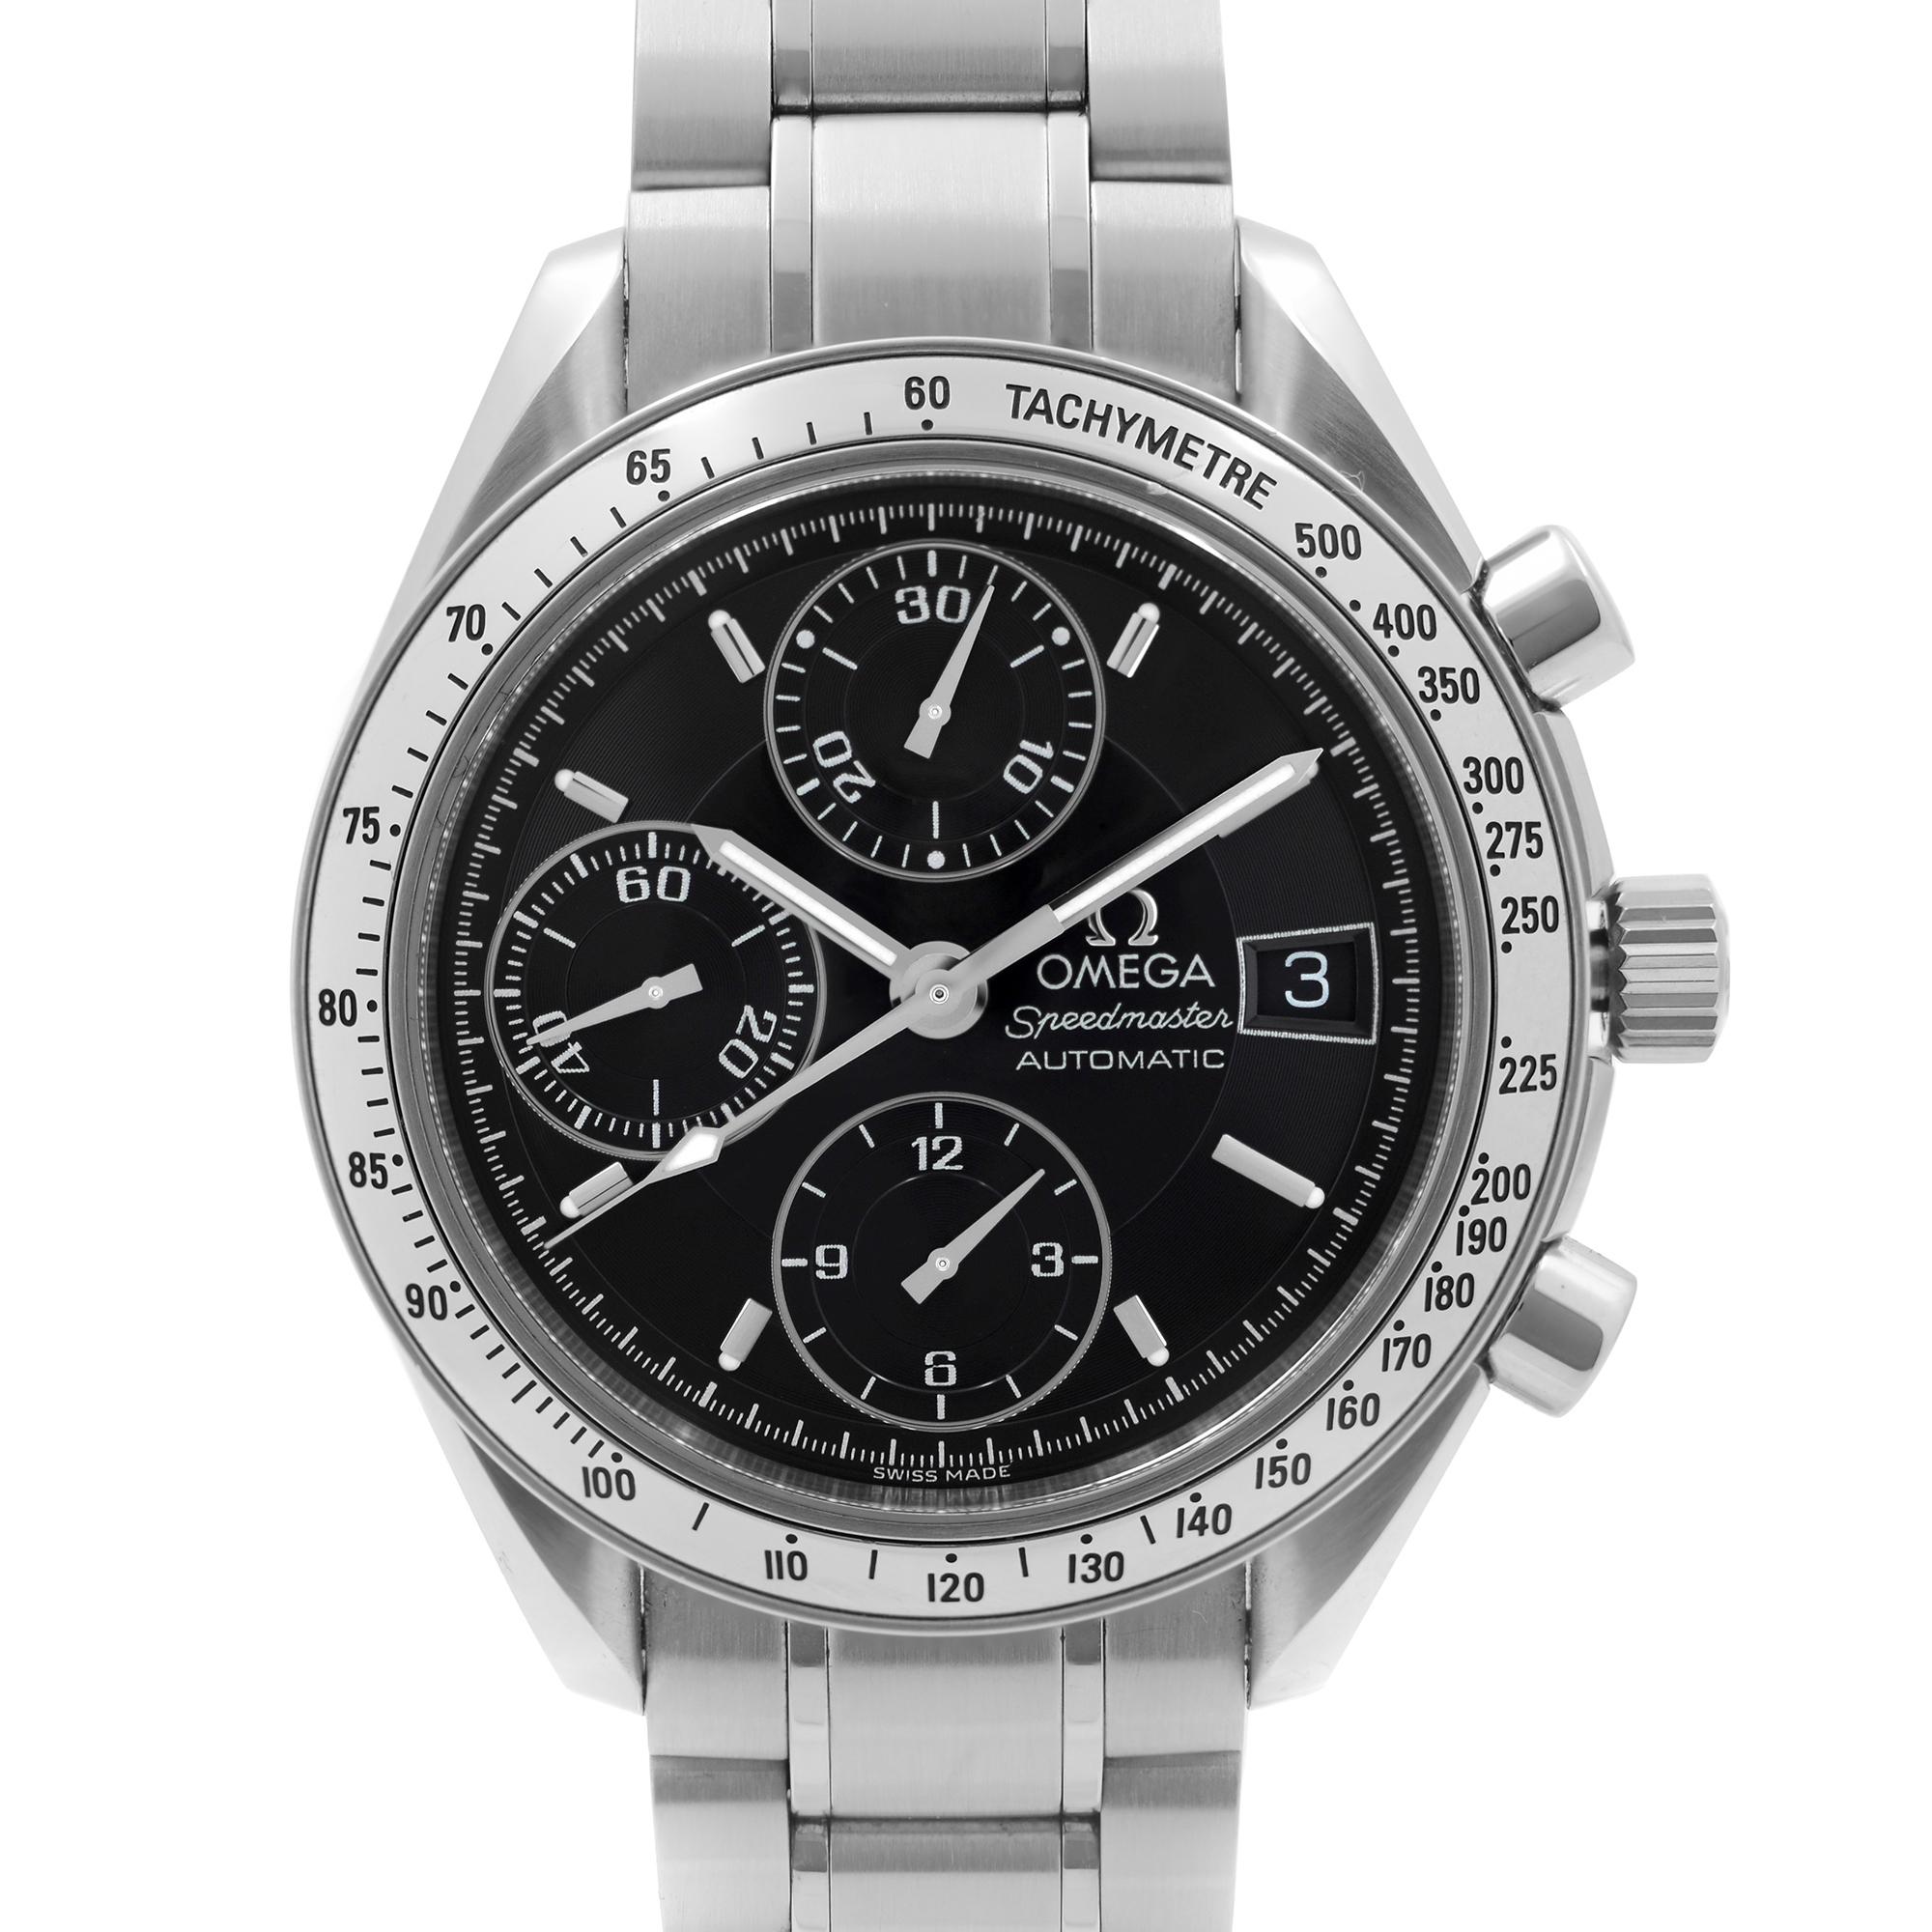 Great pre-owned condition. Comes with an Omega warranty card but no original box. 


Brand: OMEGA  Type: Wristwatch  Department: Men  Model Number: 3513.50.00  Country/Region of Manufacture: Switzerland  Style: Sport  Model: Omega Speedmaster 